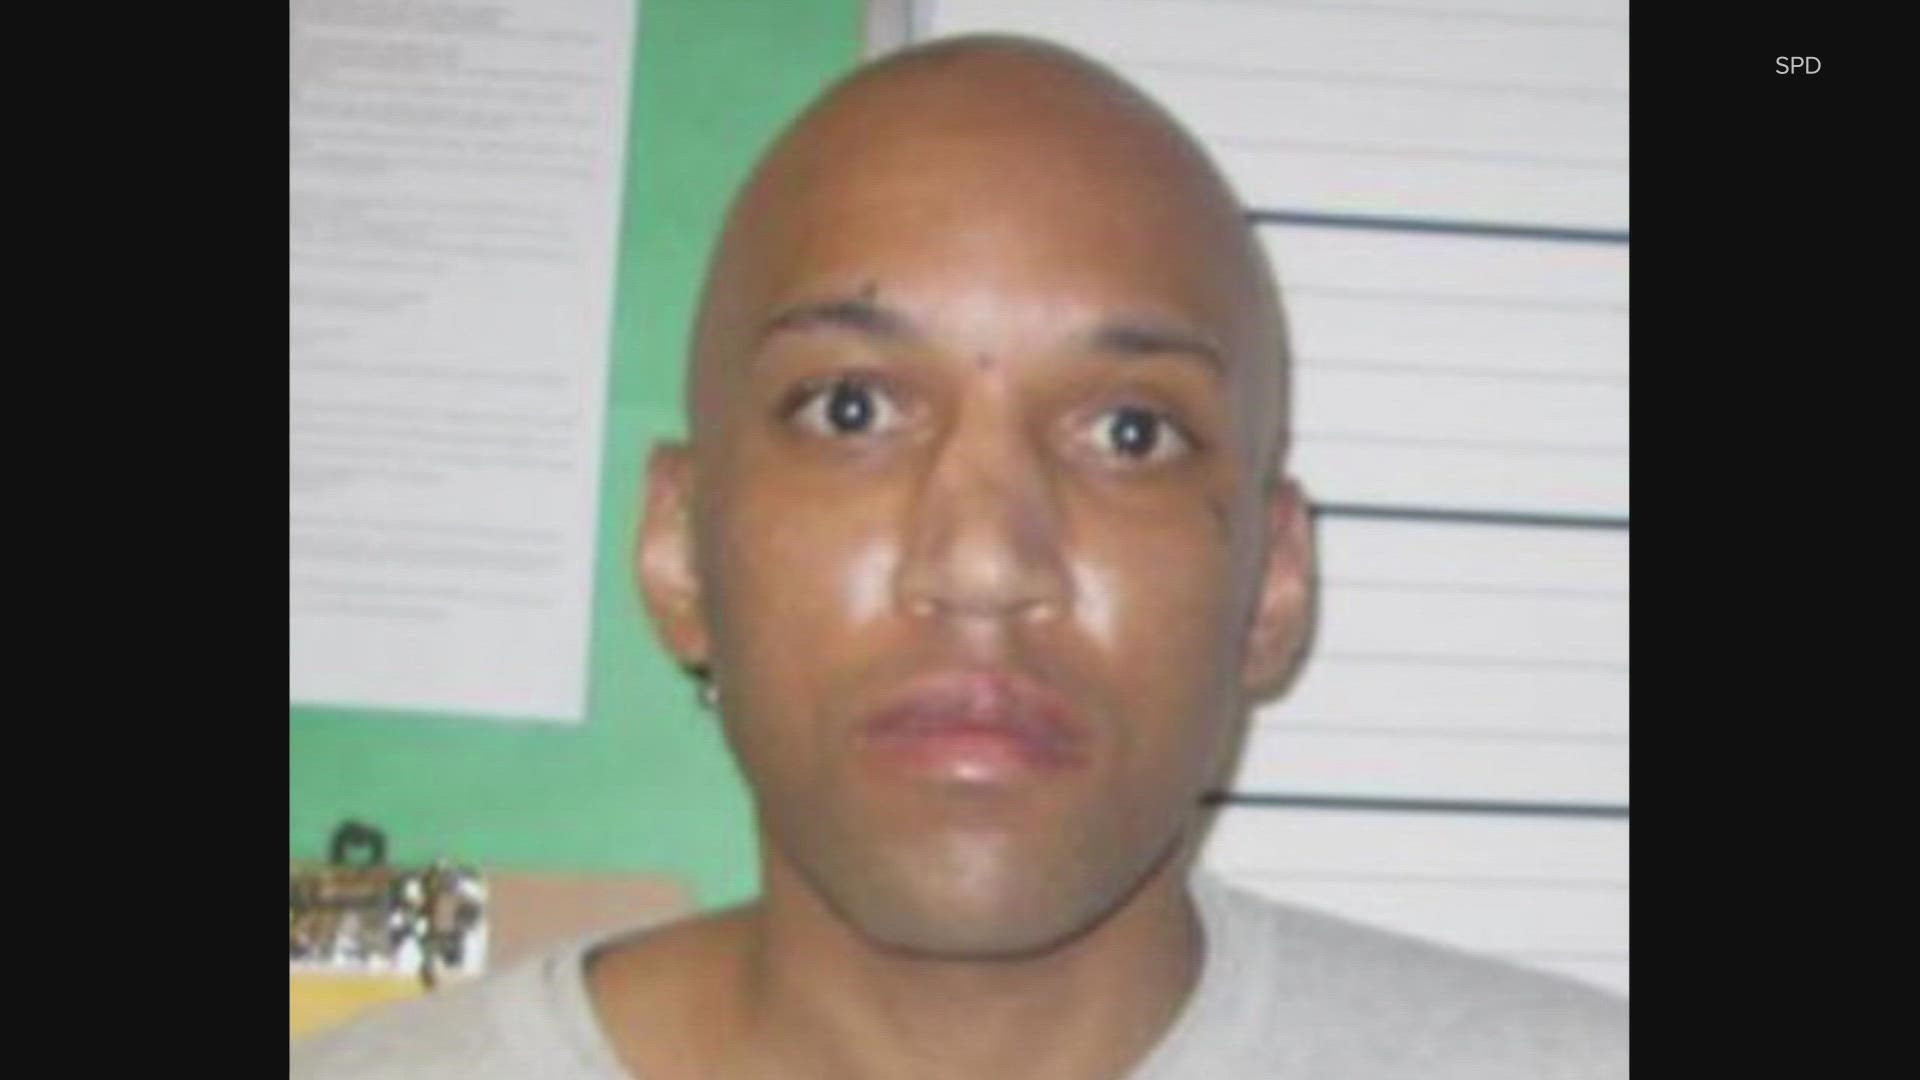 At the time of these crimes, 33-year-old Jordan Alexander was placed on 'escape' status from a work release program.